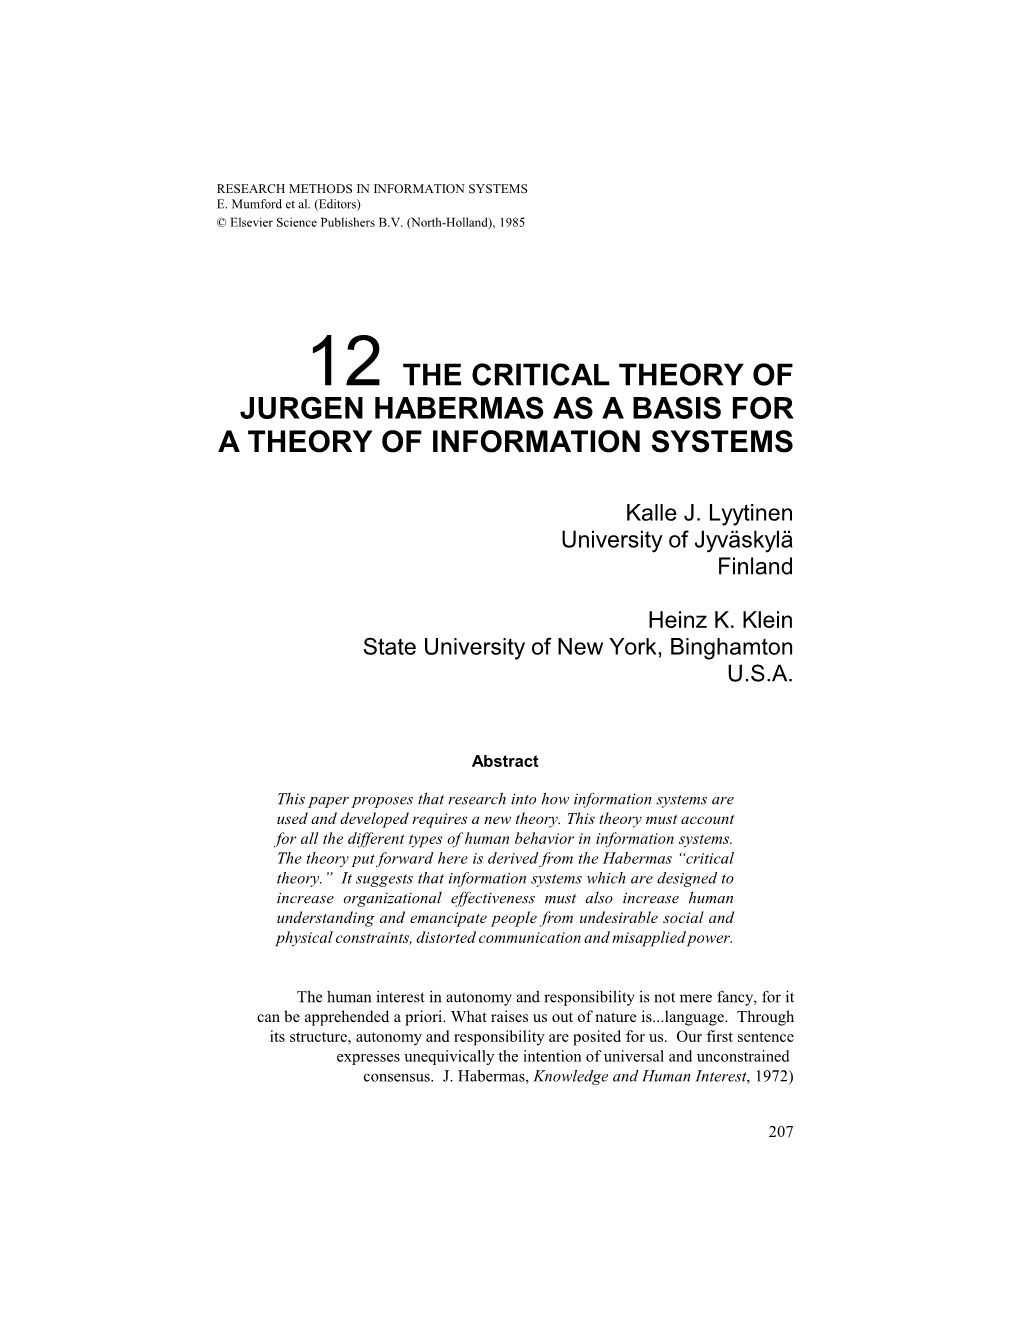 12 the Critical Theory of Jurgen Habermas As a Basis for a Theory of Information Systems